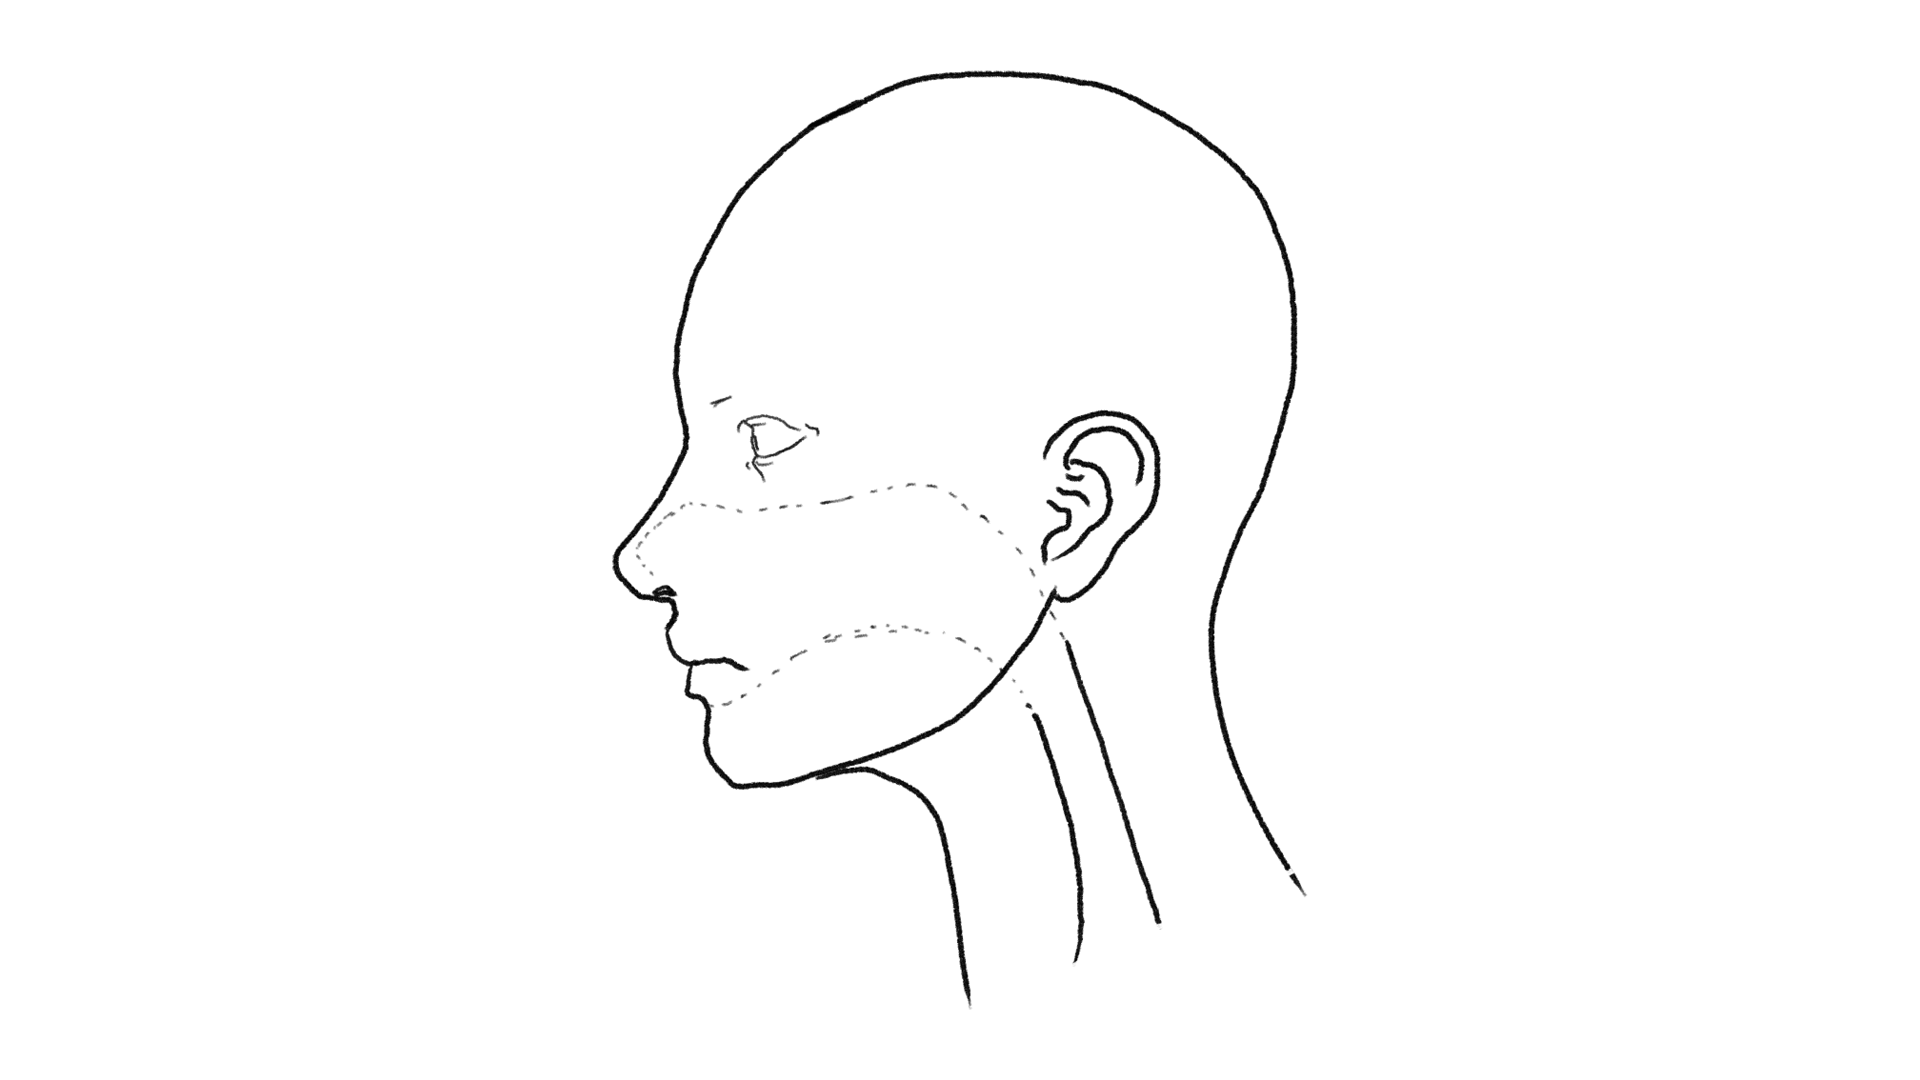 Ear Nose and Throat (ENT)